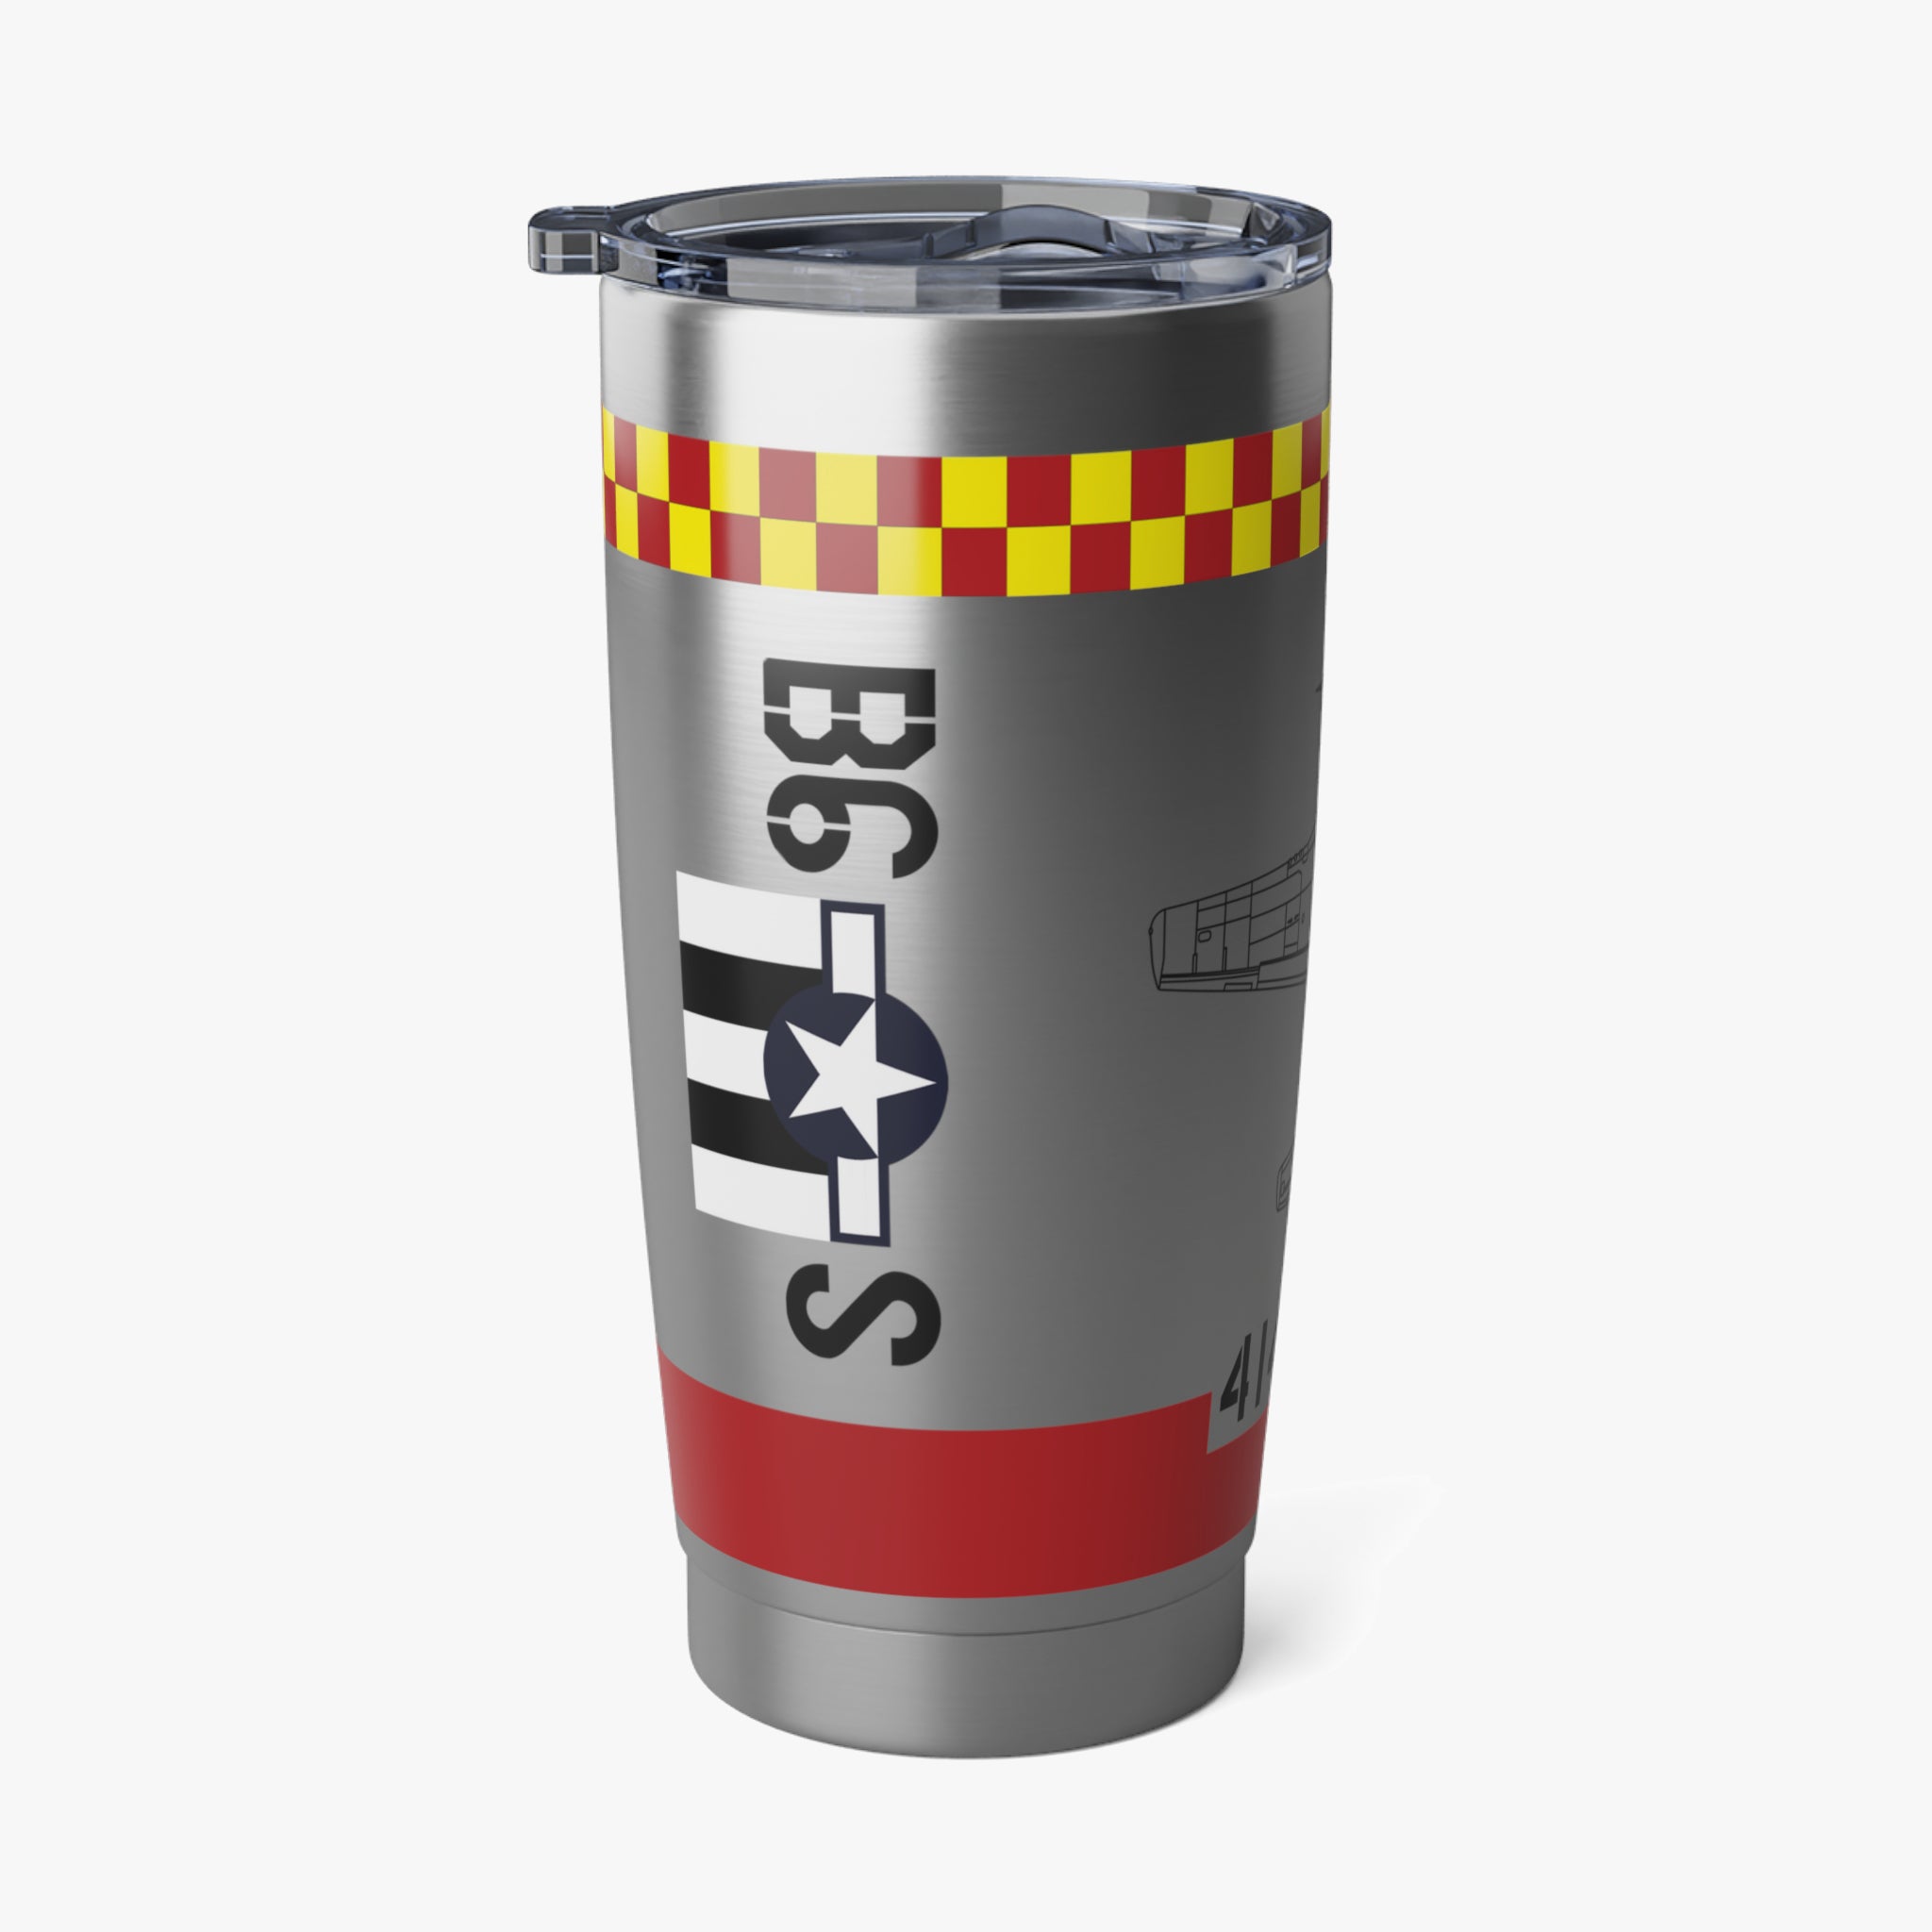 P-51 "Old Crow" Inspired 20oz (590ml) Stainless Steel Tumbler - I Love a Hangar